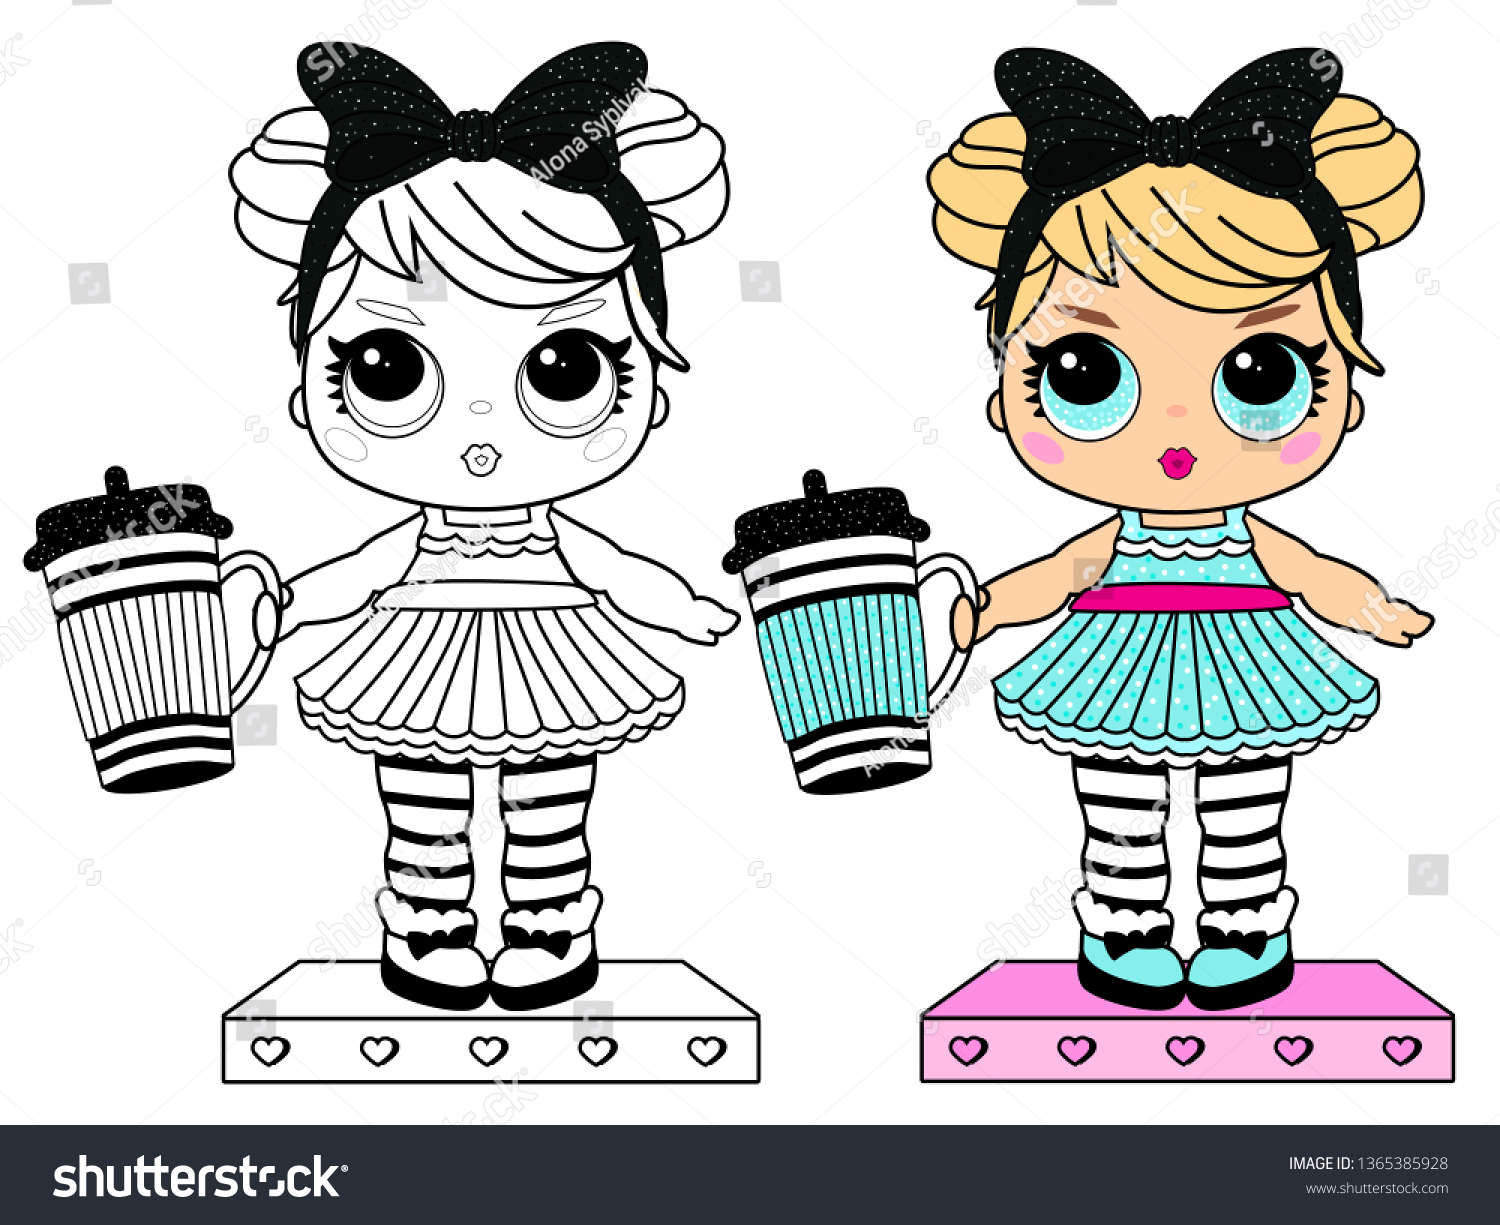 Coloring Page Book Little Girl Girlish Royalty Free Stock Image